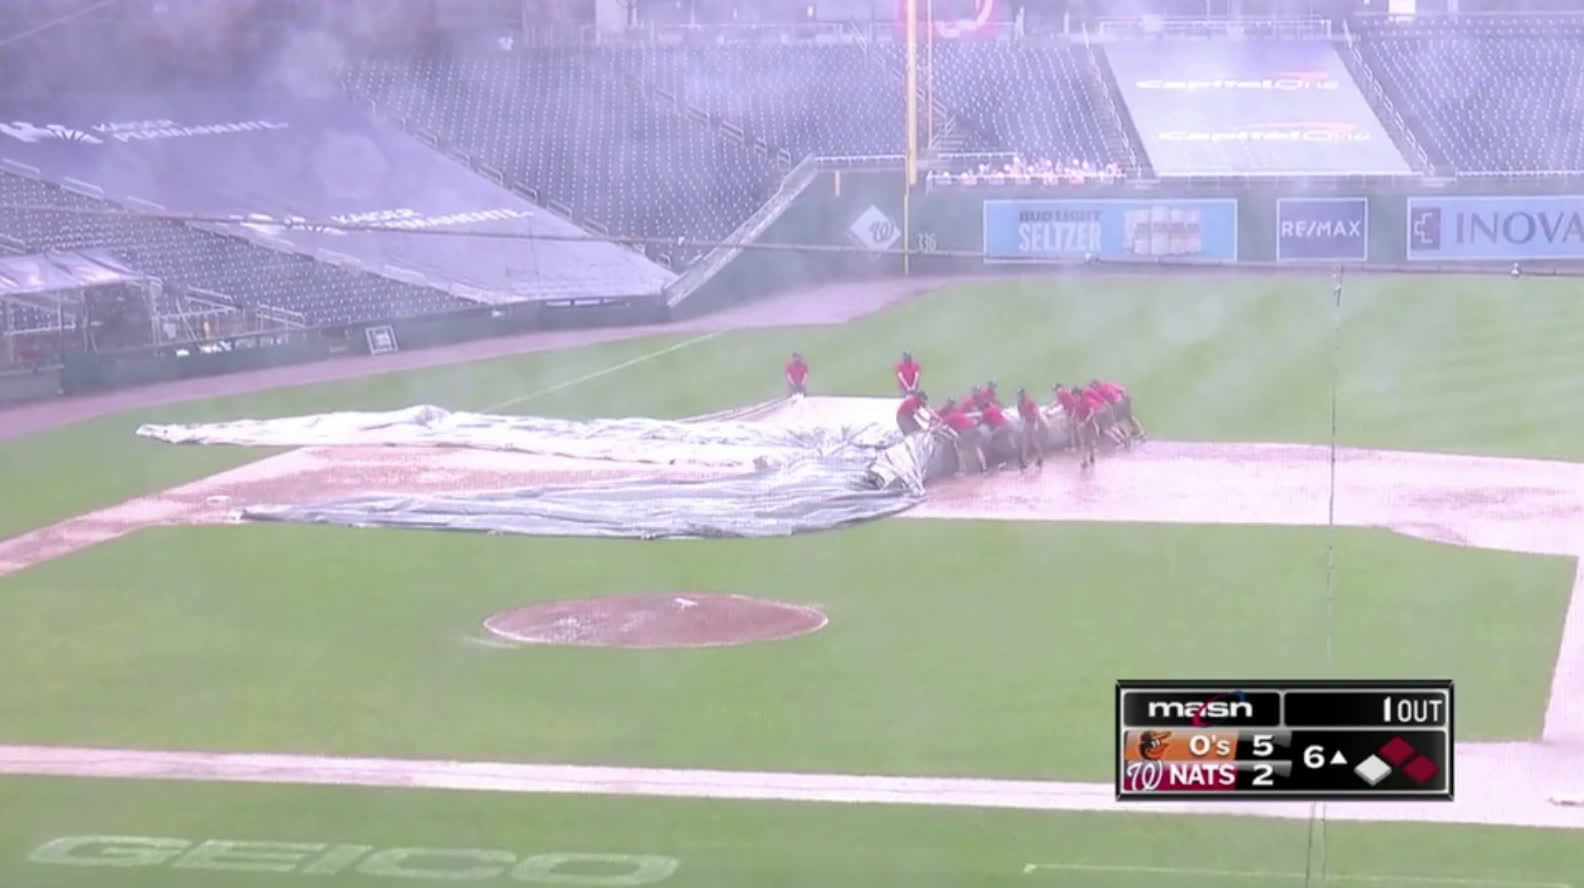 FULL VIDEO: Nationals grounds crew struggle to place improperly